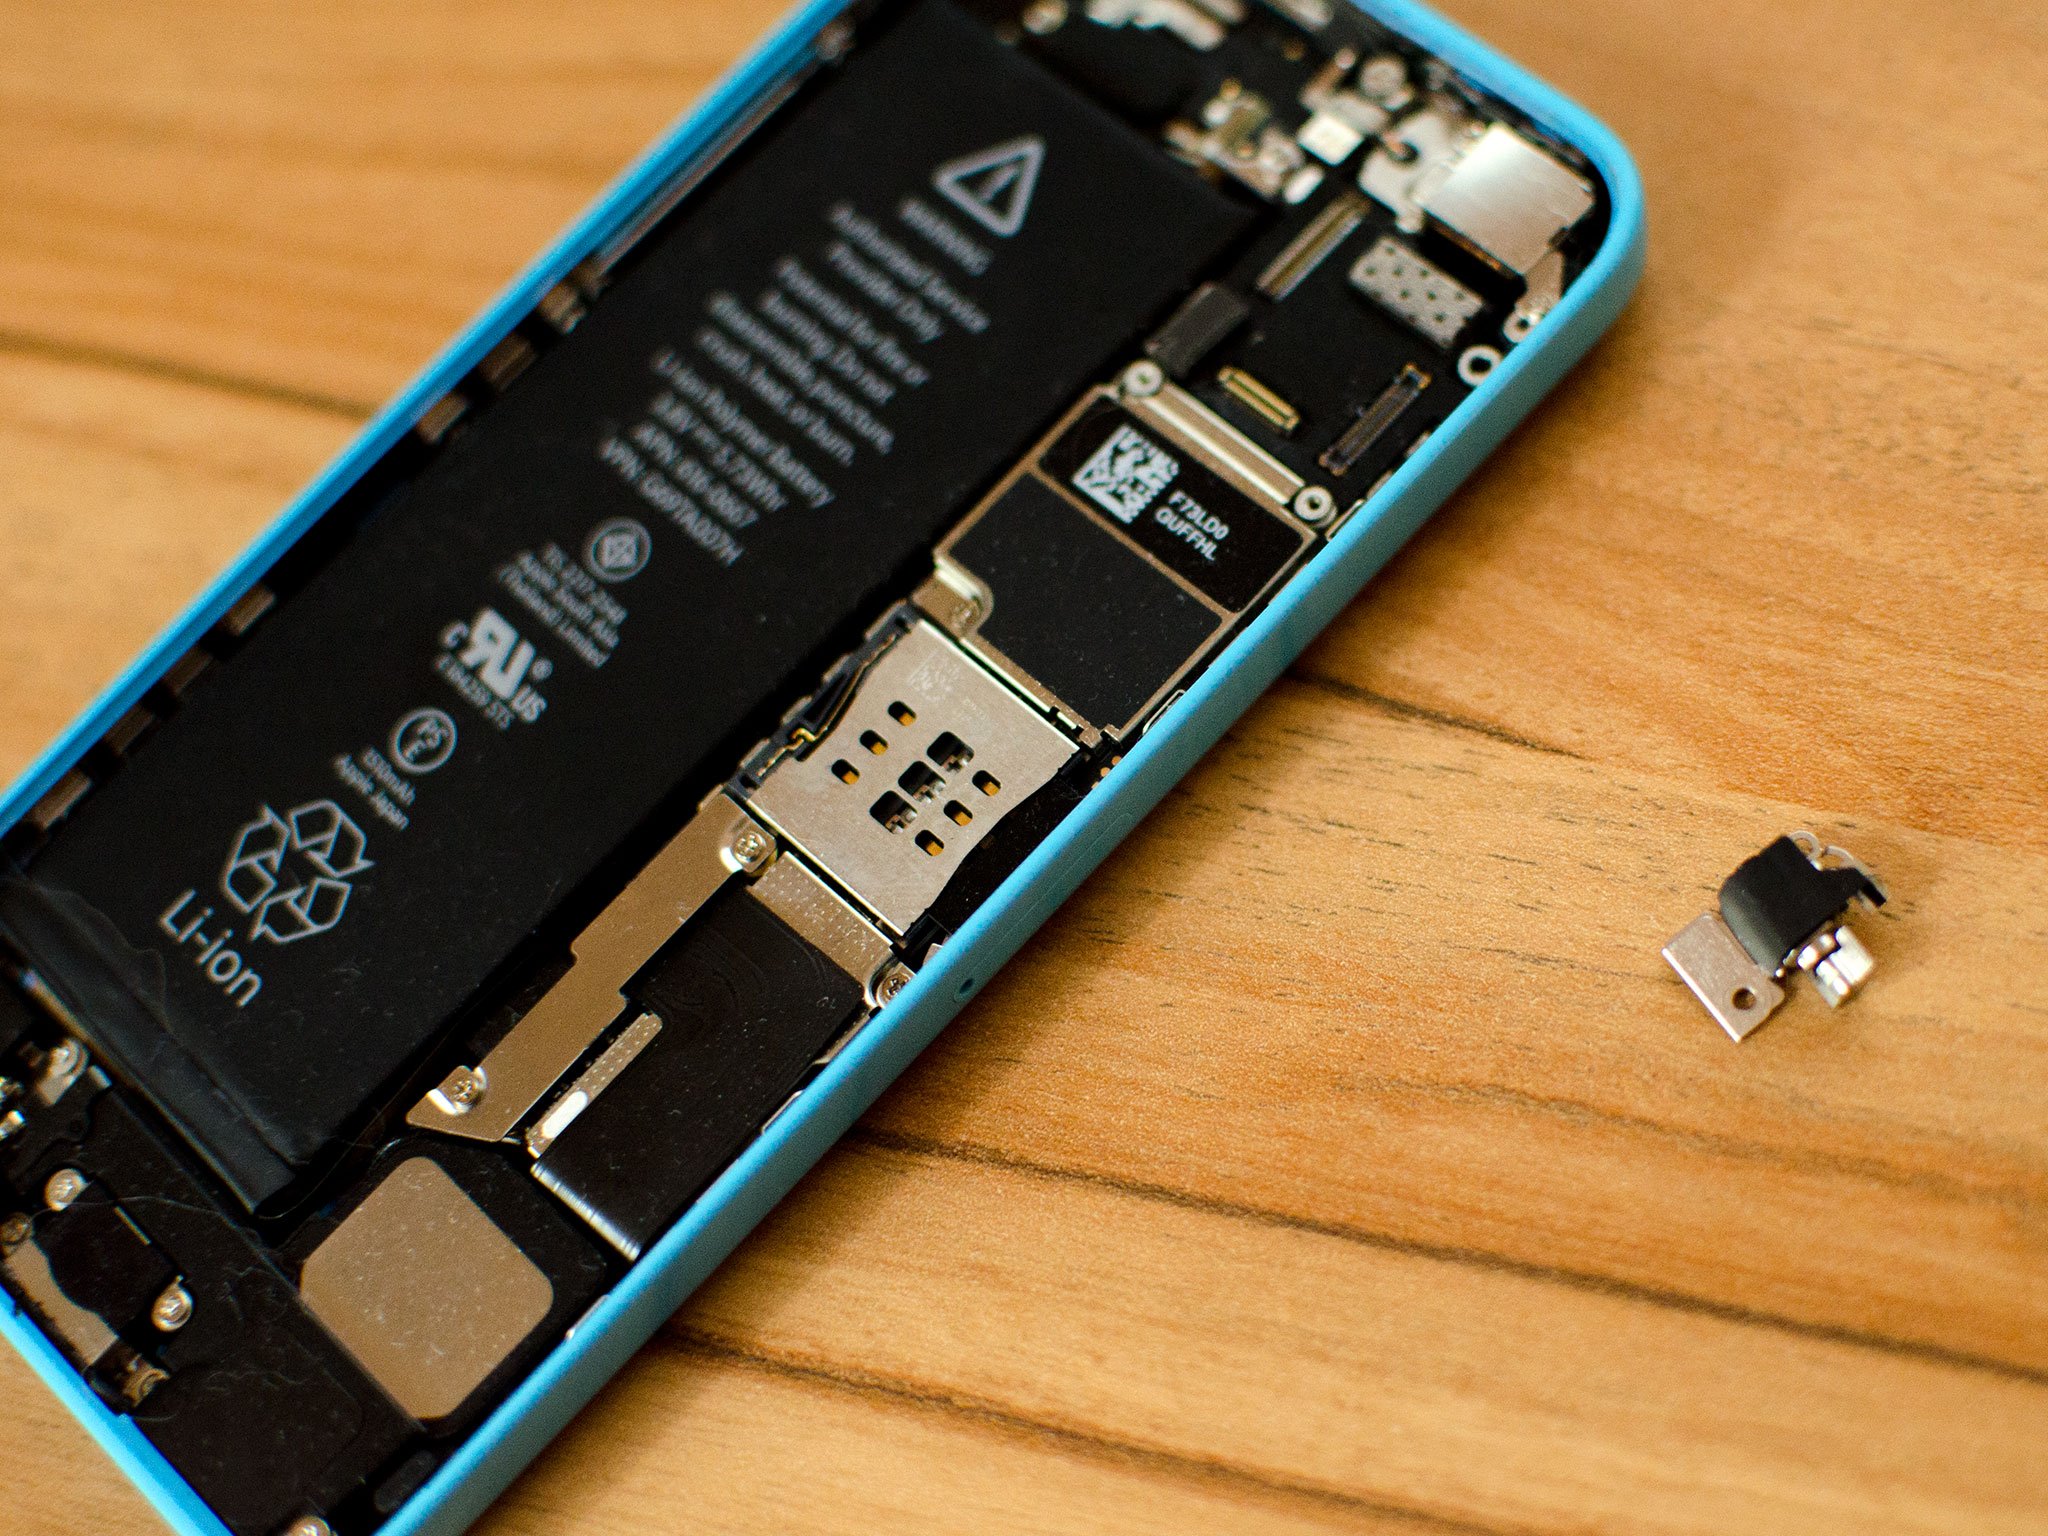 How to replace a broken vibrator in the iPhone 5c